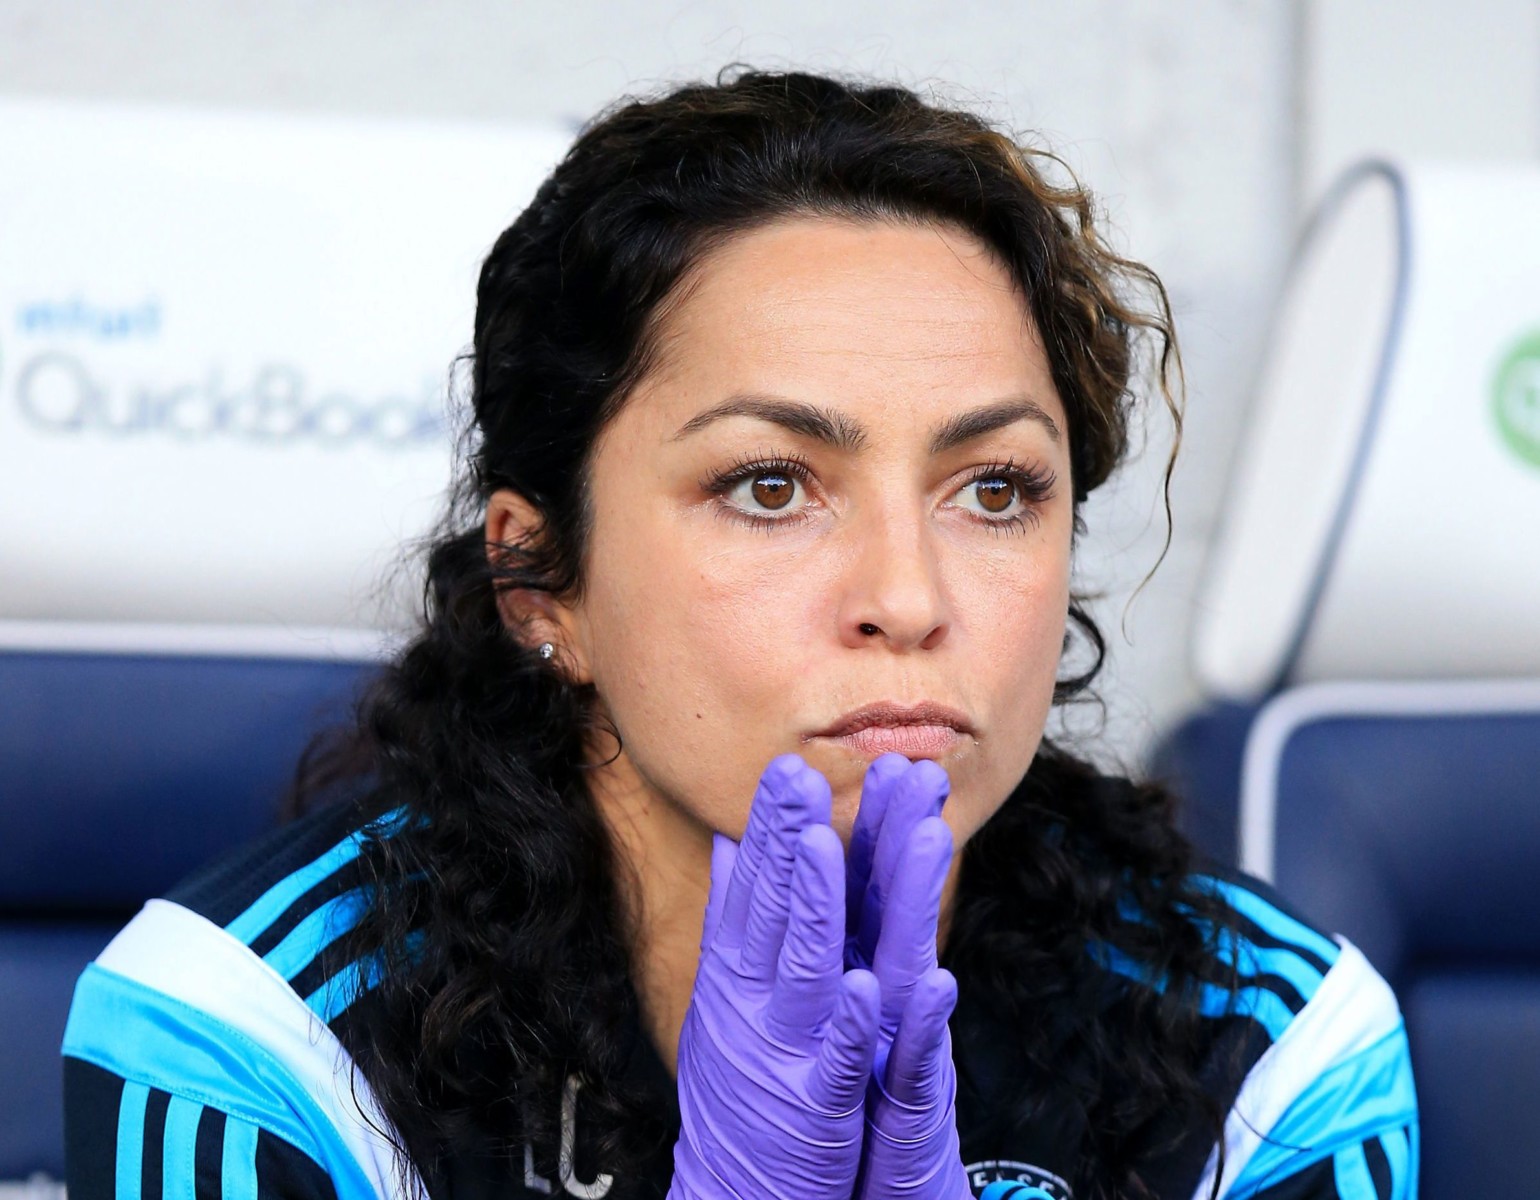 , Ex-Chelsea doc Carneiro who rowed with Mourinho warns ‘it takes one case for this to blow up’ amid Prem return plans